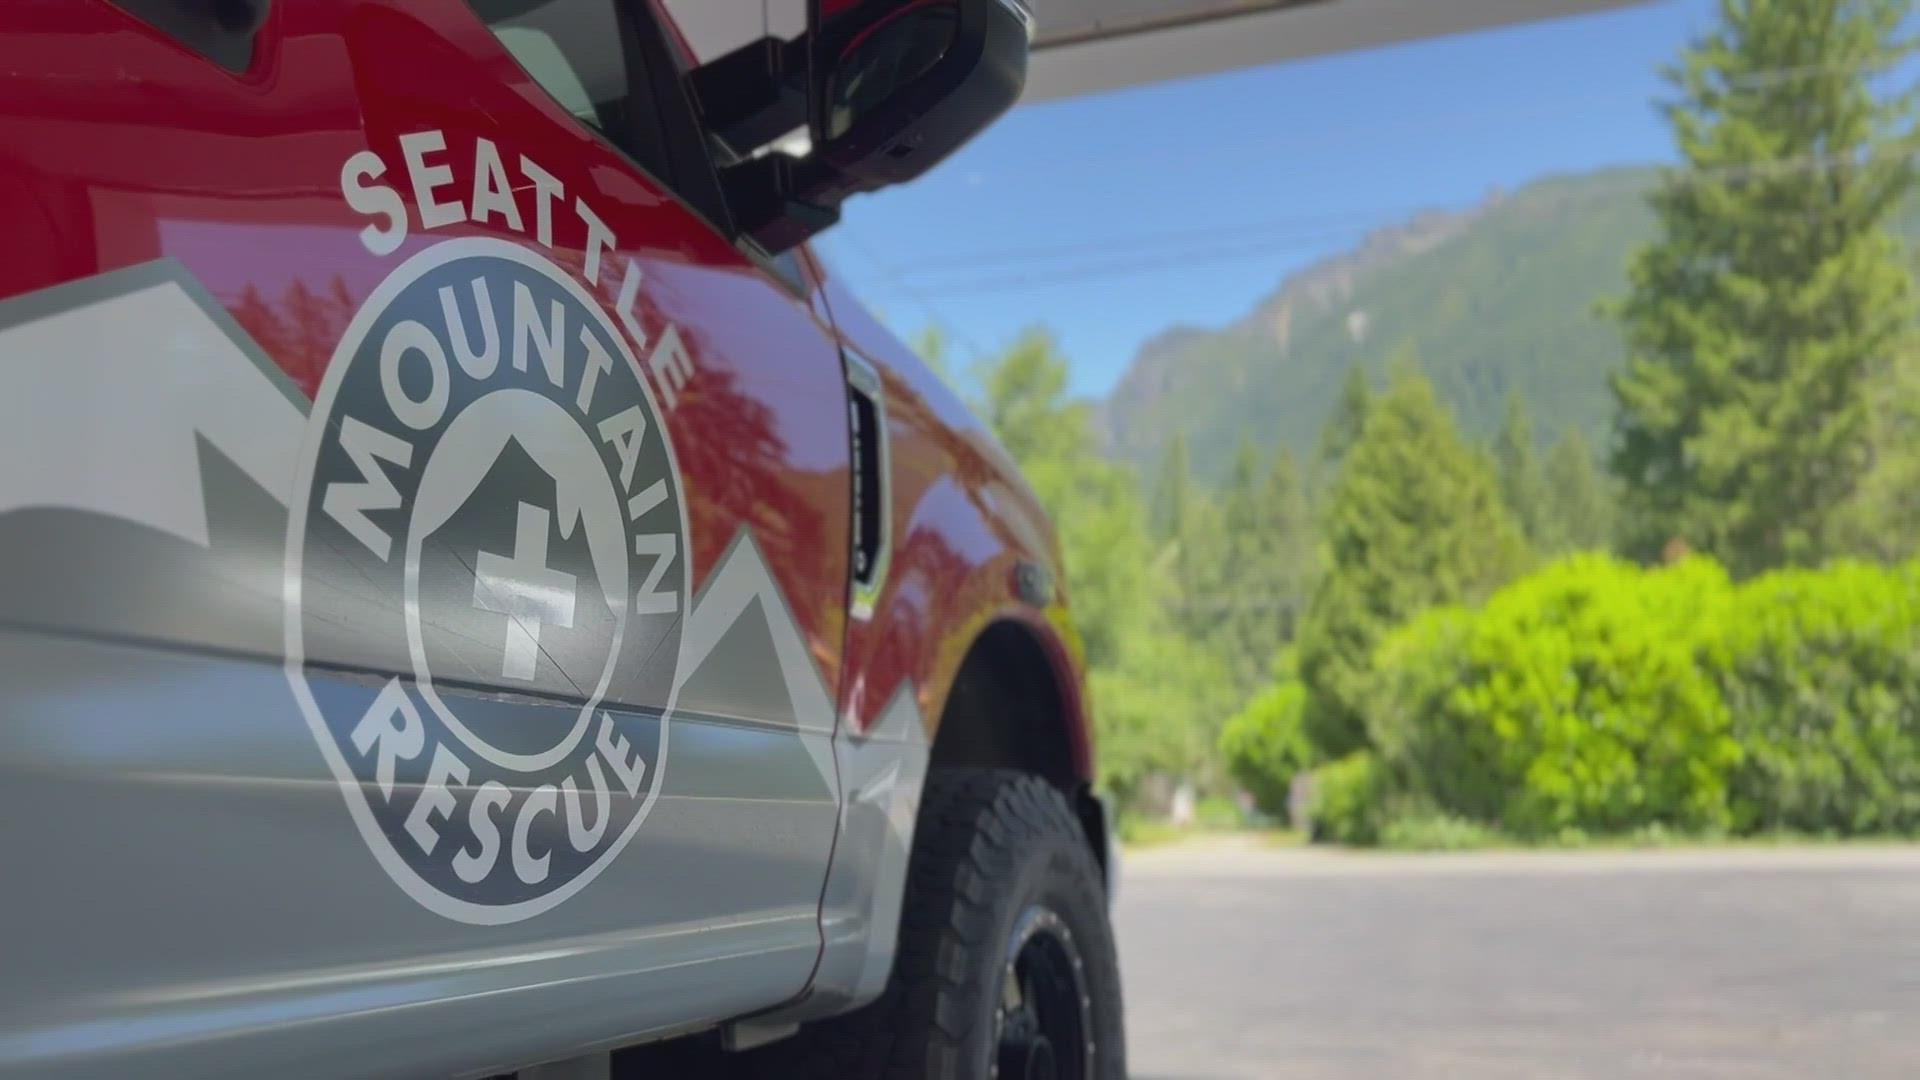 The nonprofit recently helped search for a missing 10-year-old that spent the night alone in the woods after getting lost in Kittitas County.